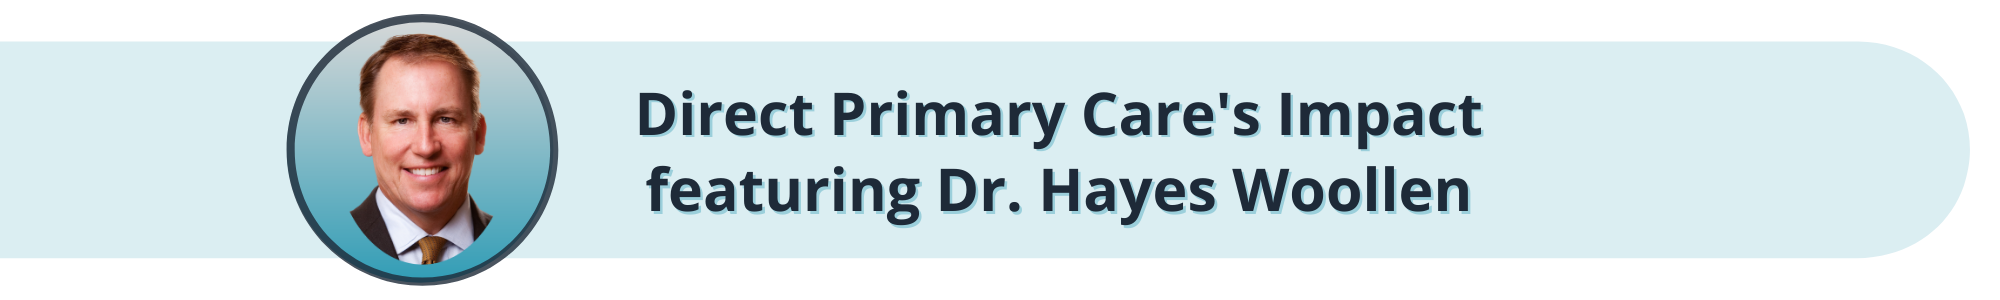 Direct Primary Care's Impact featuring Dr. Hayes Woollen